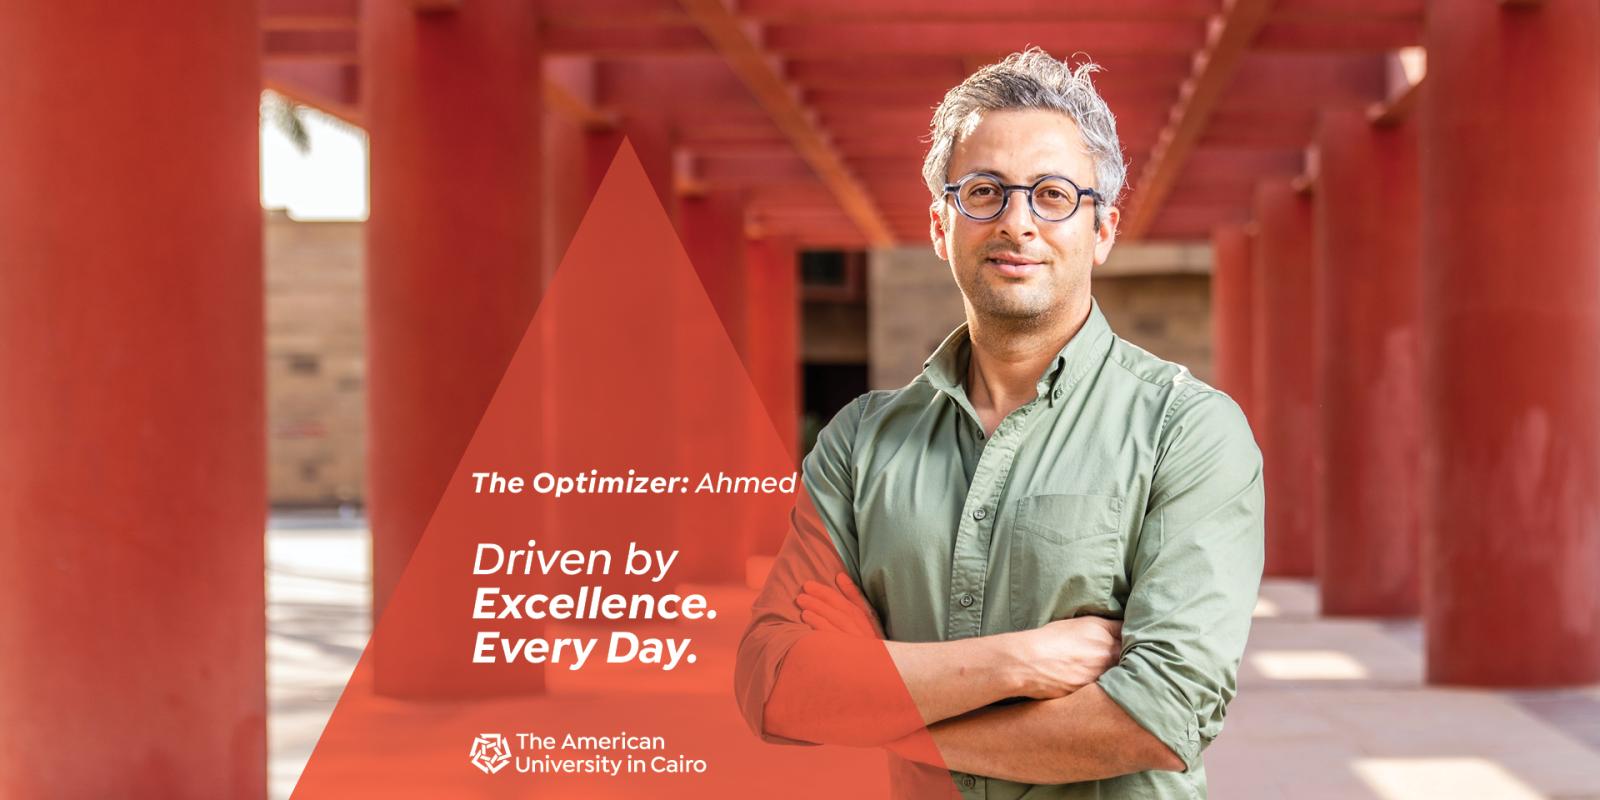 A man standing next to red pillars, text reads "The Optimizer: Ahmed. Driven by Excellence. Every Day. The American University in Cairo"